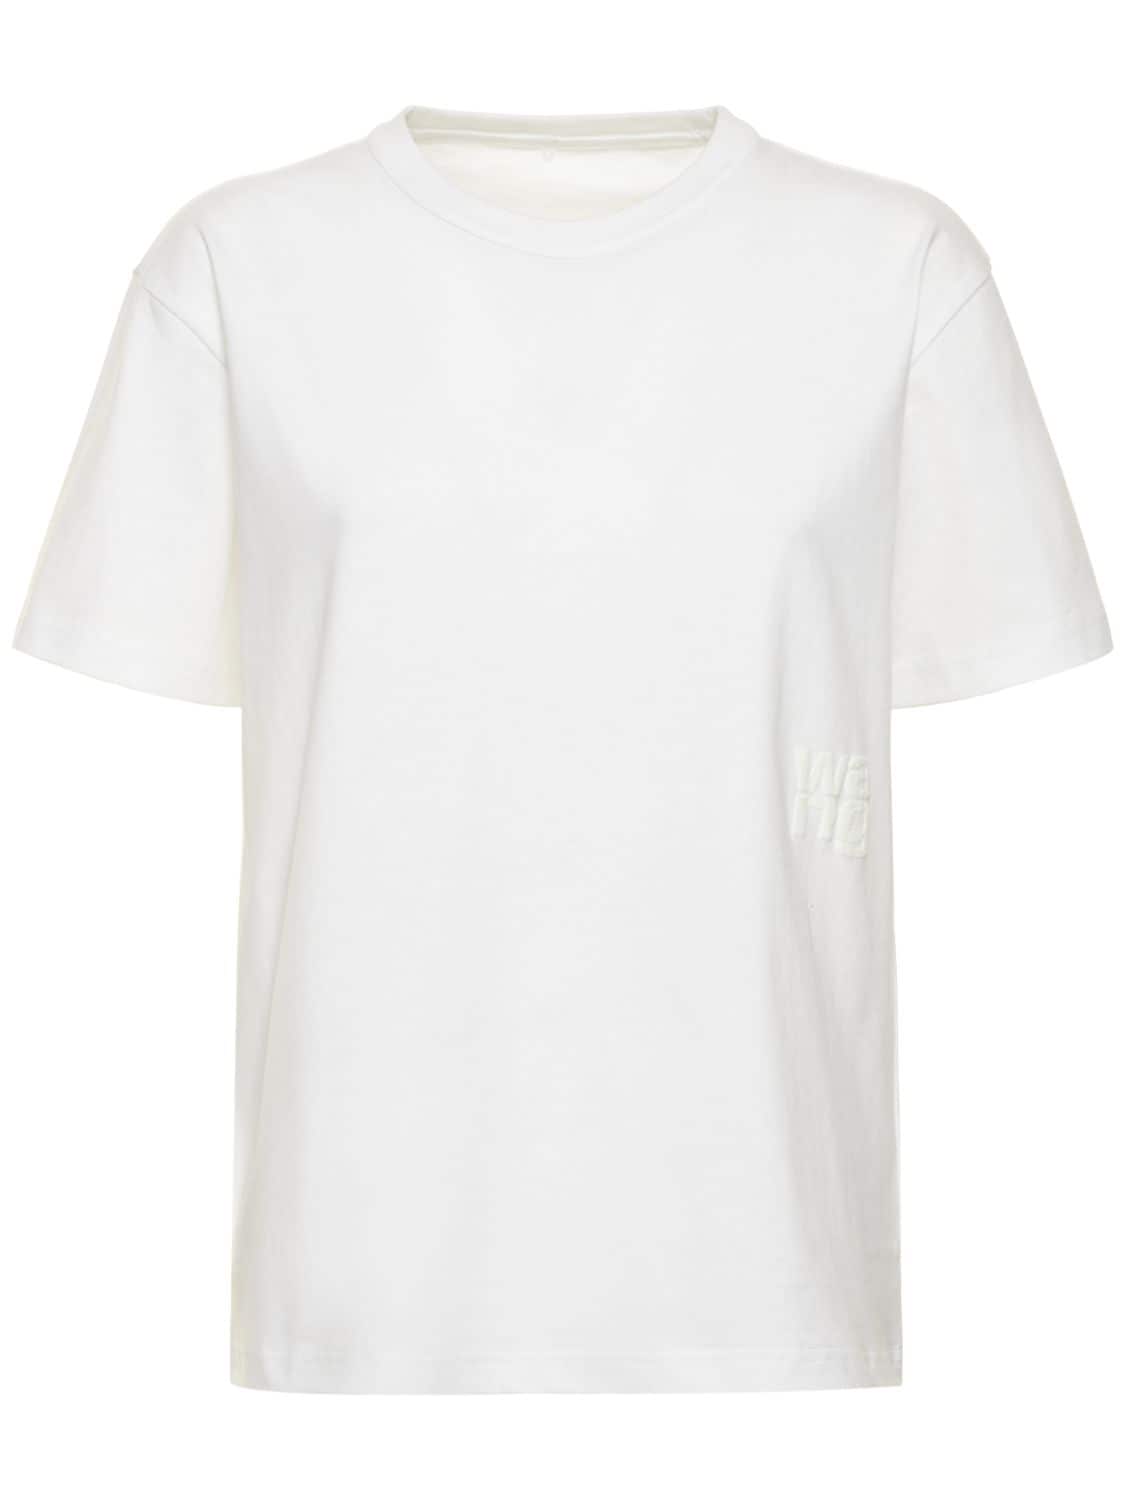 Image of Essential Short Sleeve Cotton T-shirt